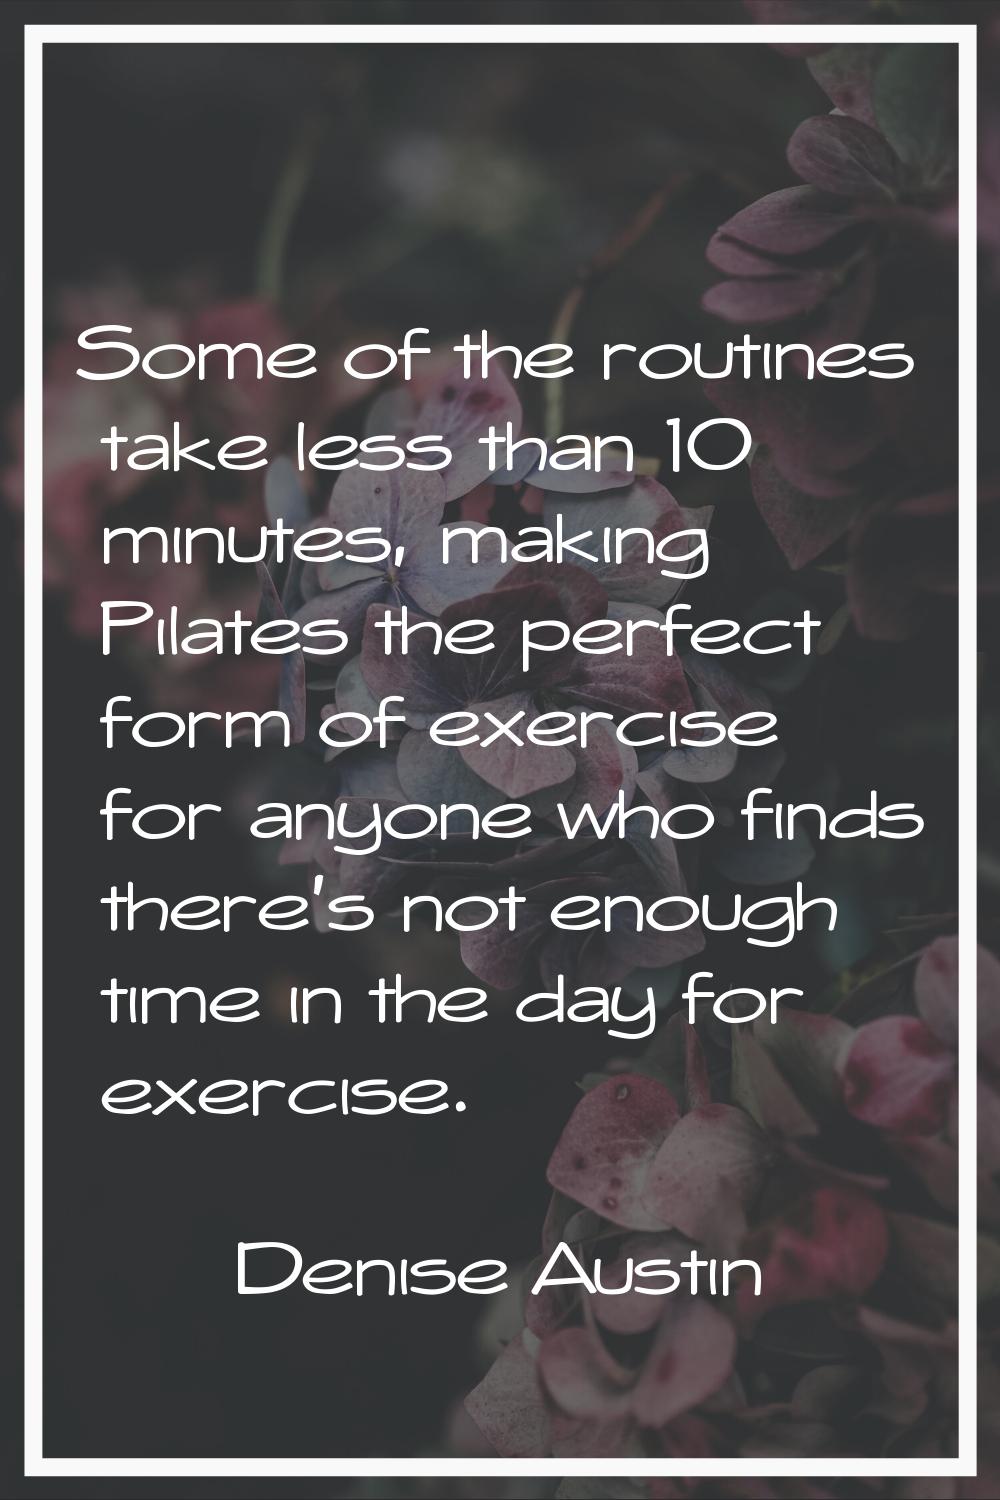 Some of the routines take less than 10 minutes, making Pilates the perfect form of exercise for any